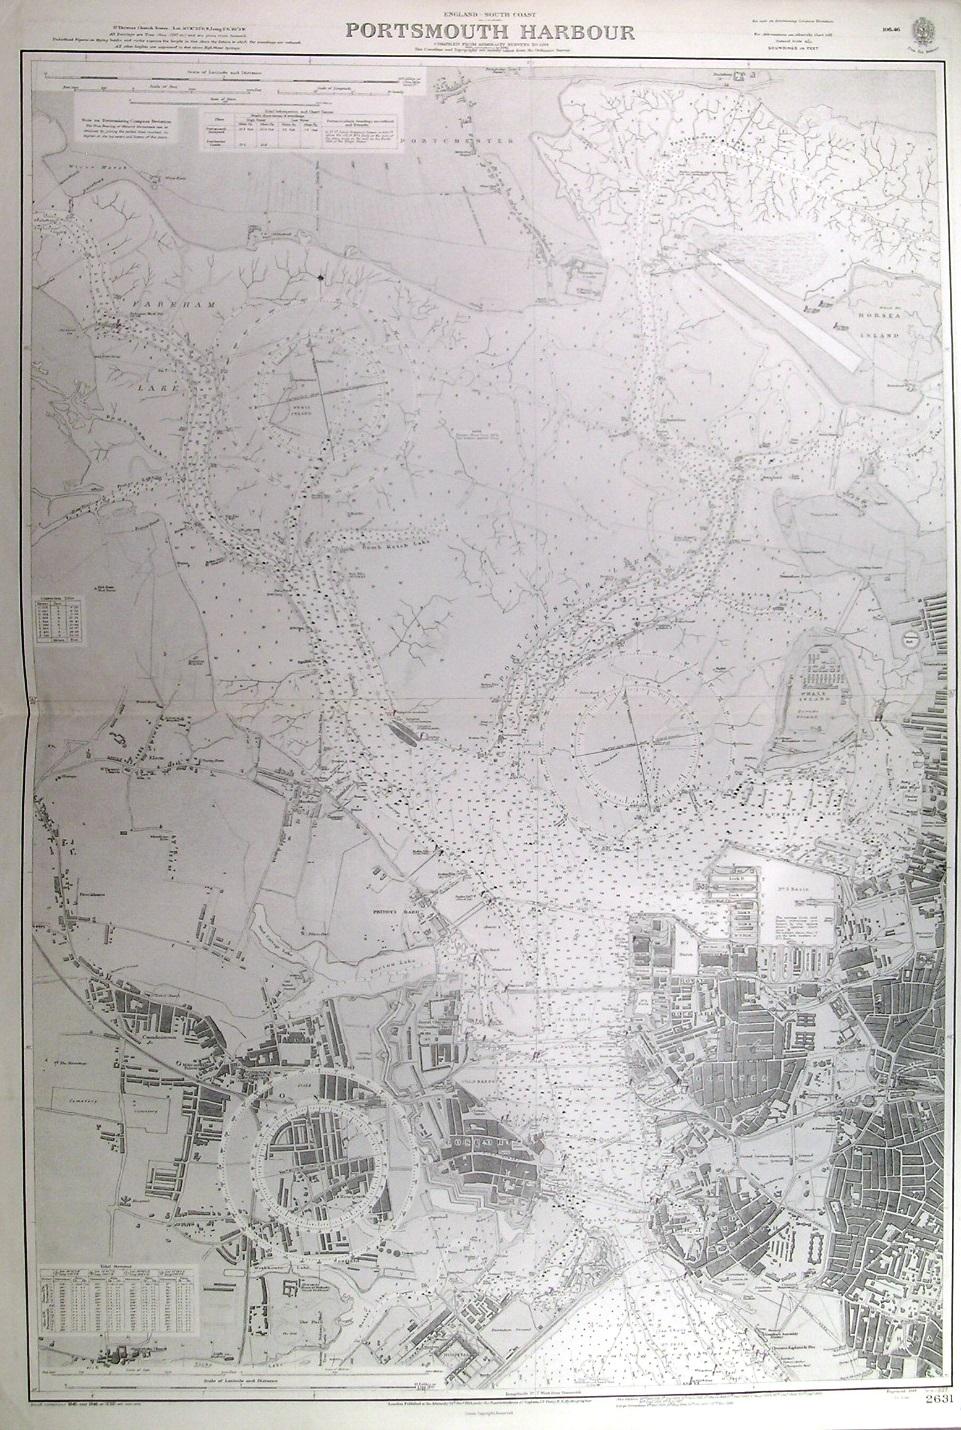 ADMIRALTY 1943 map Hampshire Portsmouth Harbour town plan & sea coast chart 